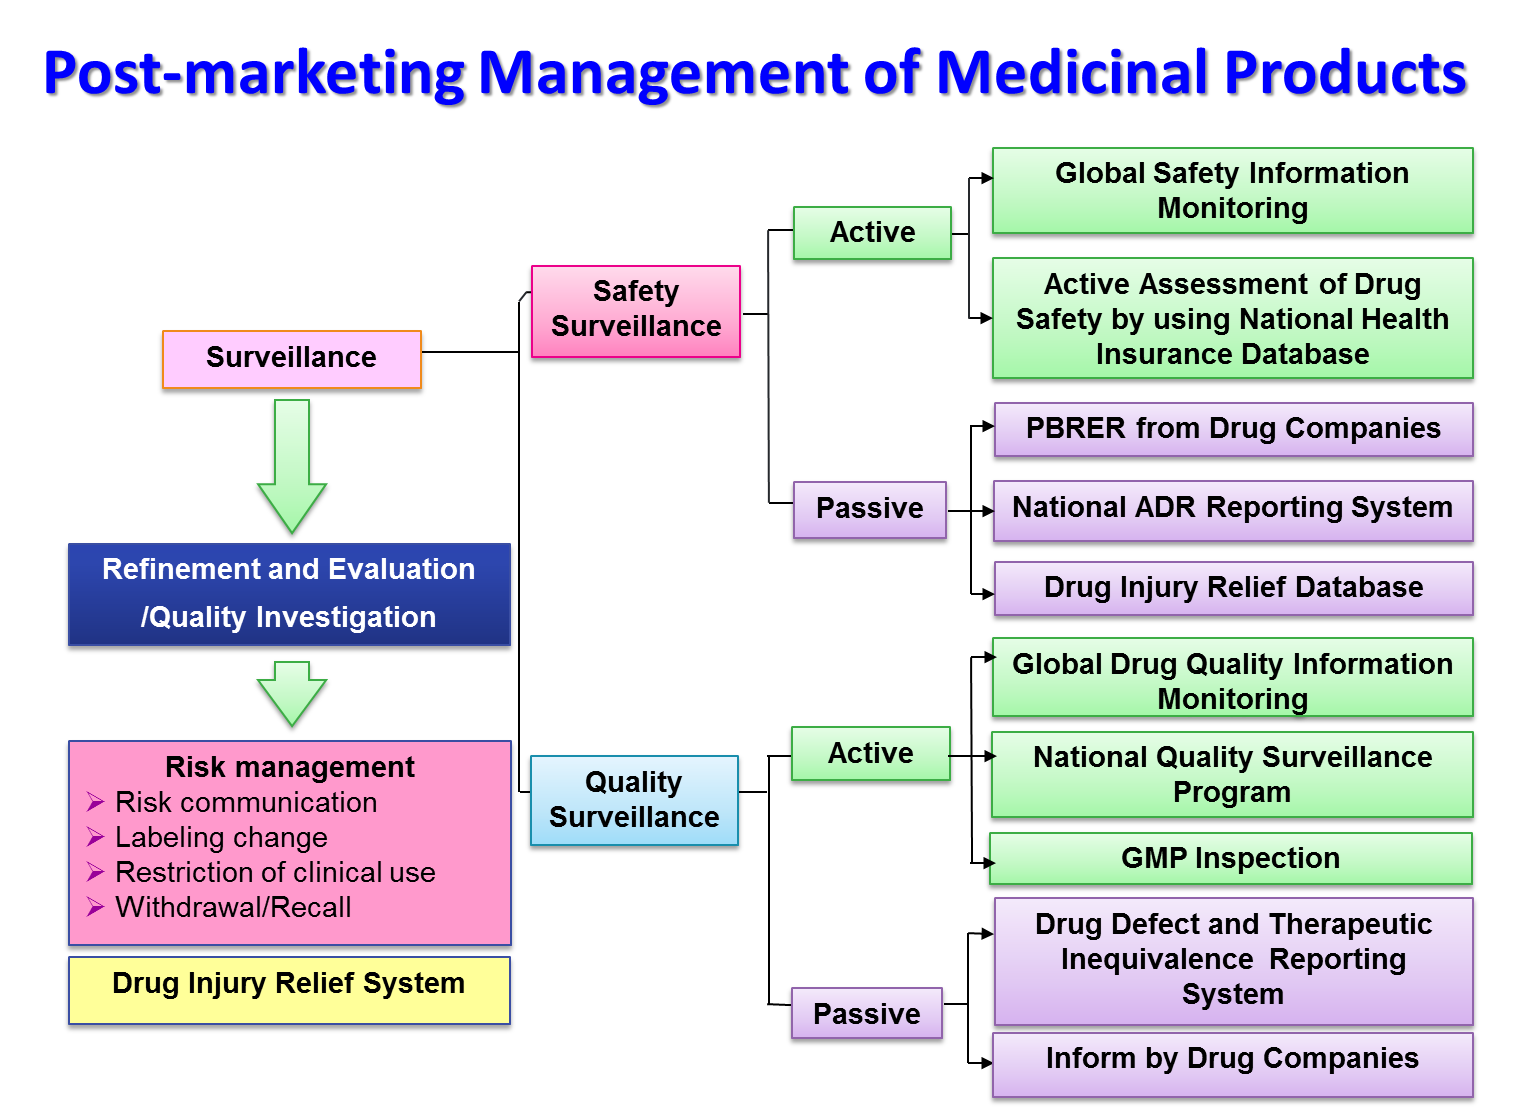 Post-marketing Management of Medicinal Products